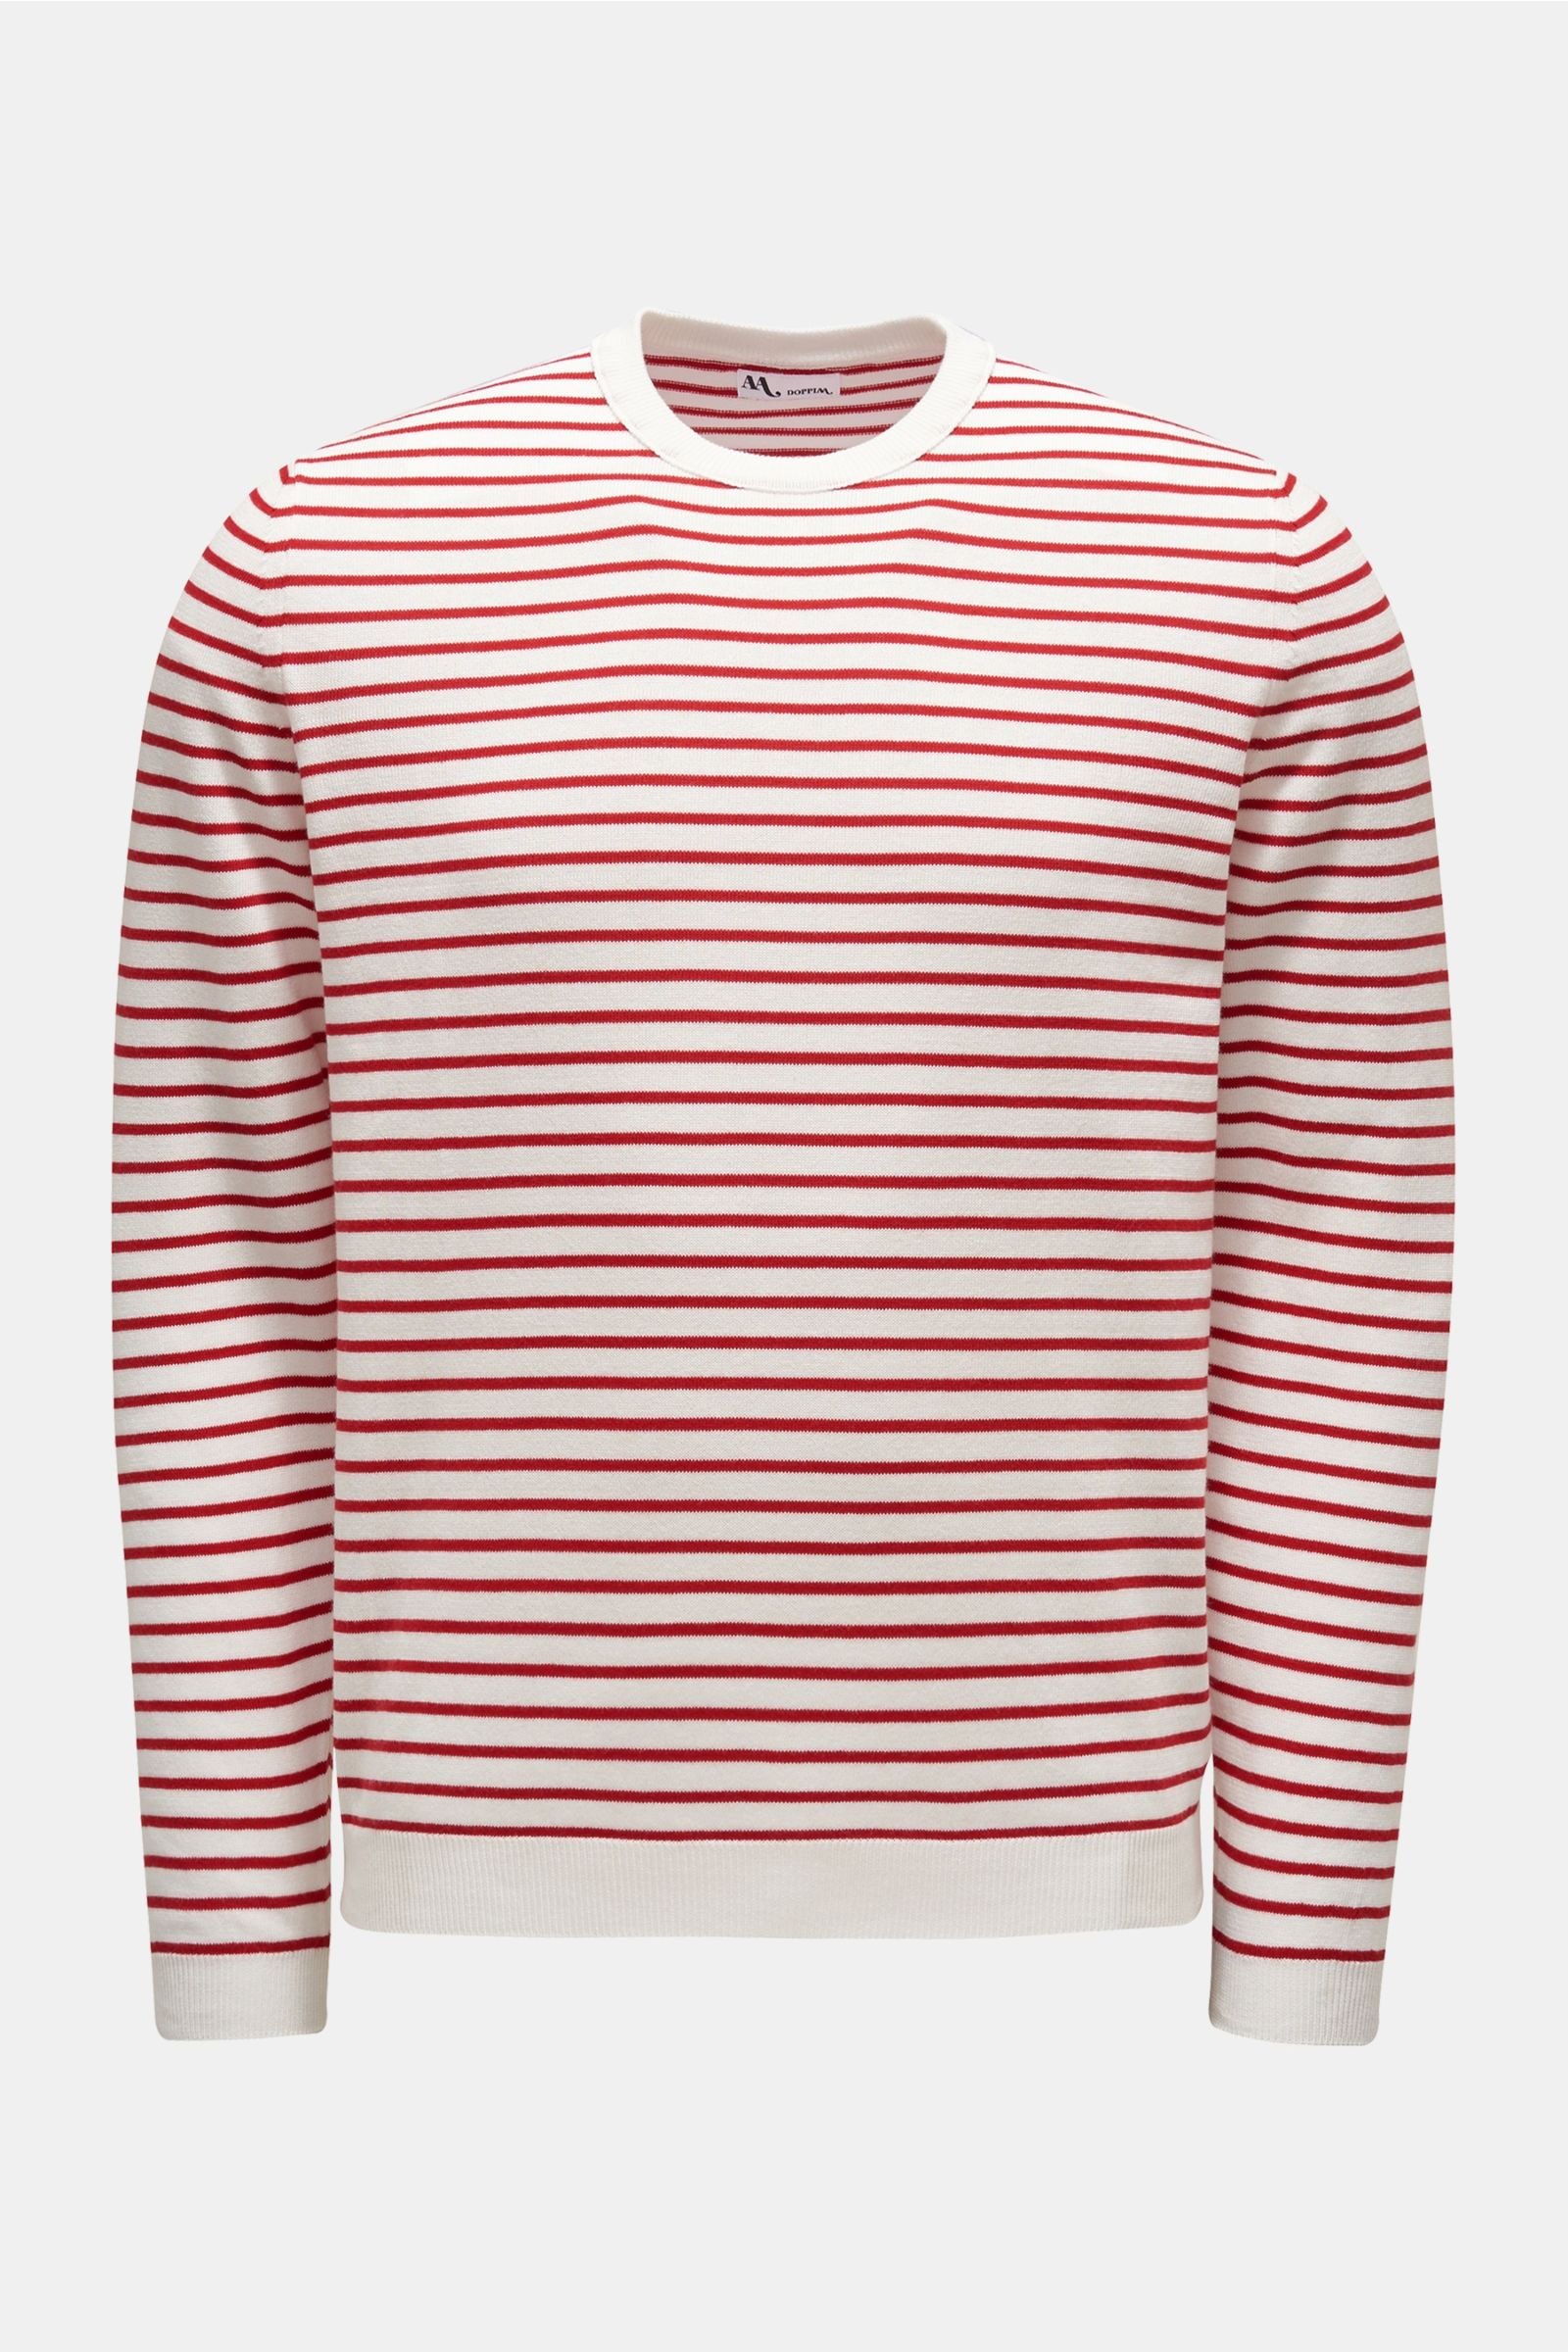 R-Neck Pullover 'Aabacco' rot/offwhite gestreift